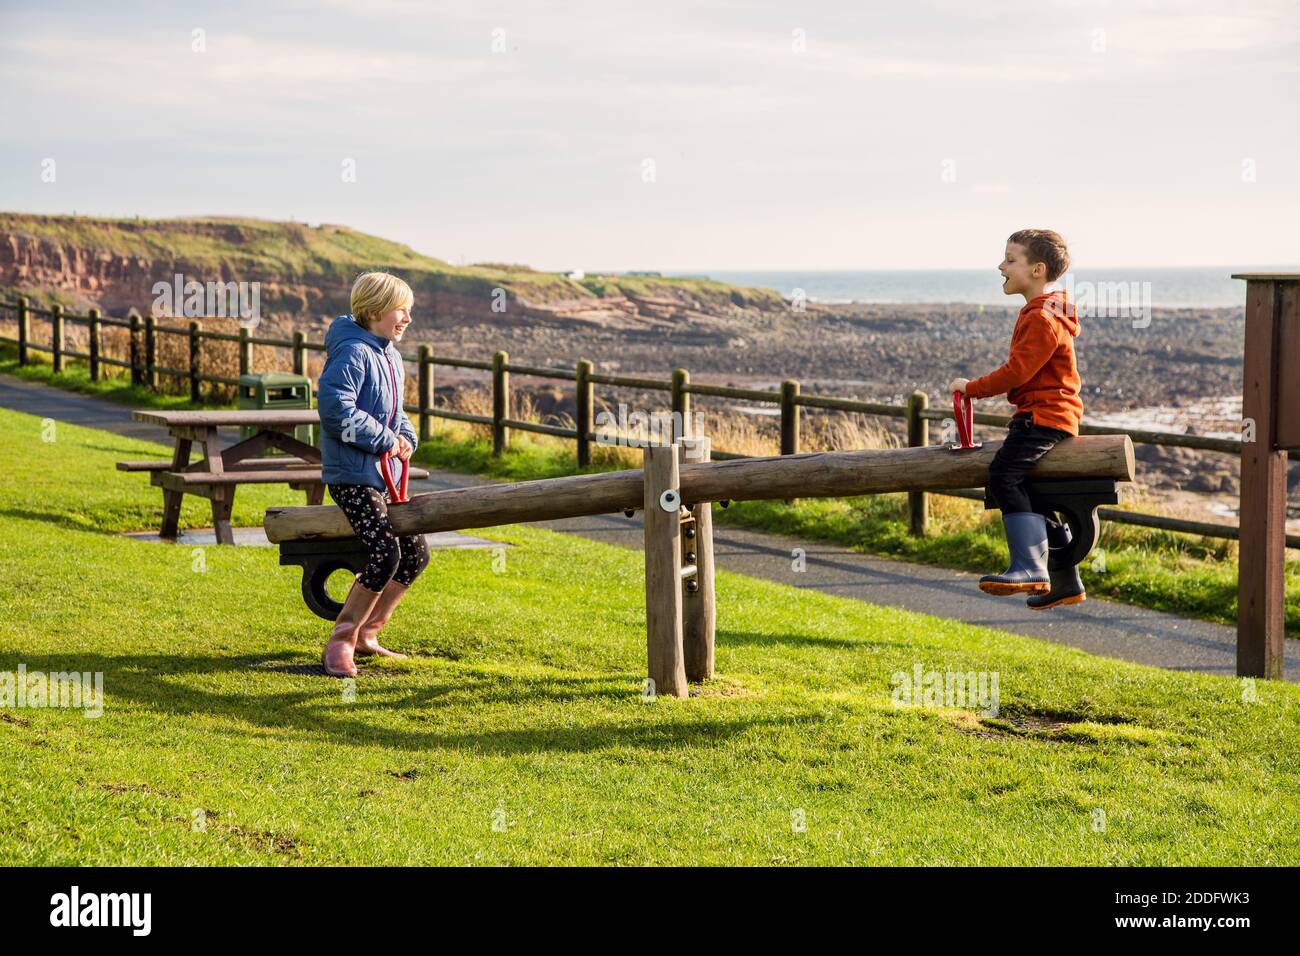 A young brother and sister playing on a seesaw in a park at Crail, Fife, Scotland. This park is on the coastal trail and is in a very beautiful locati Stock Photo